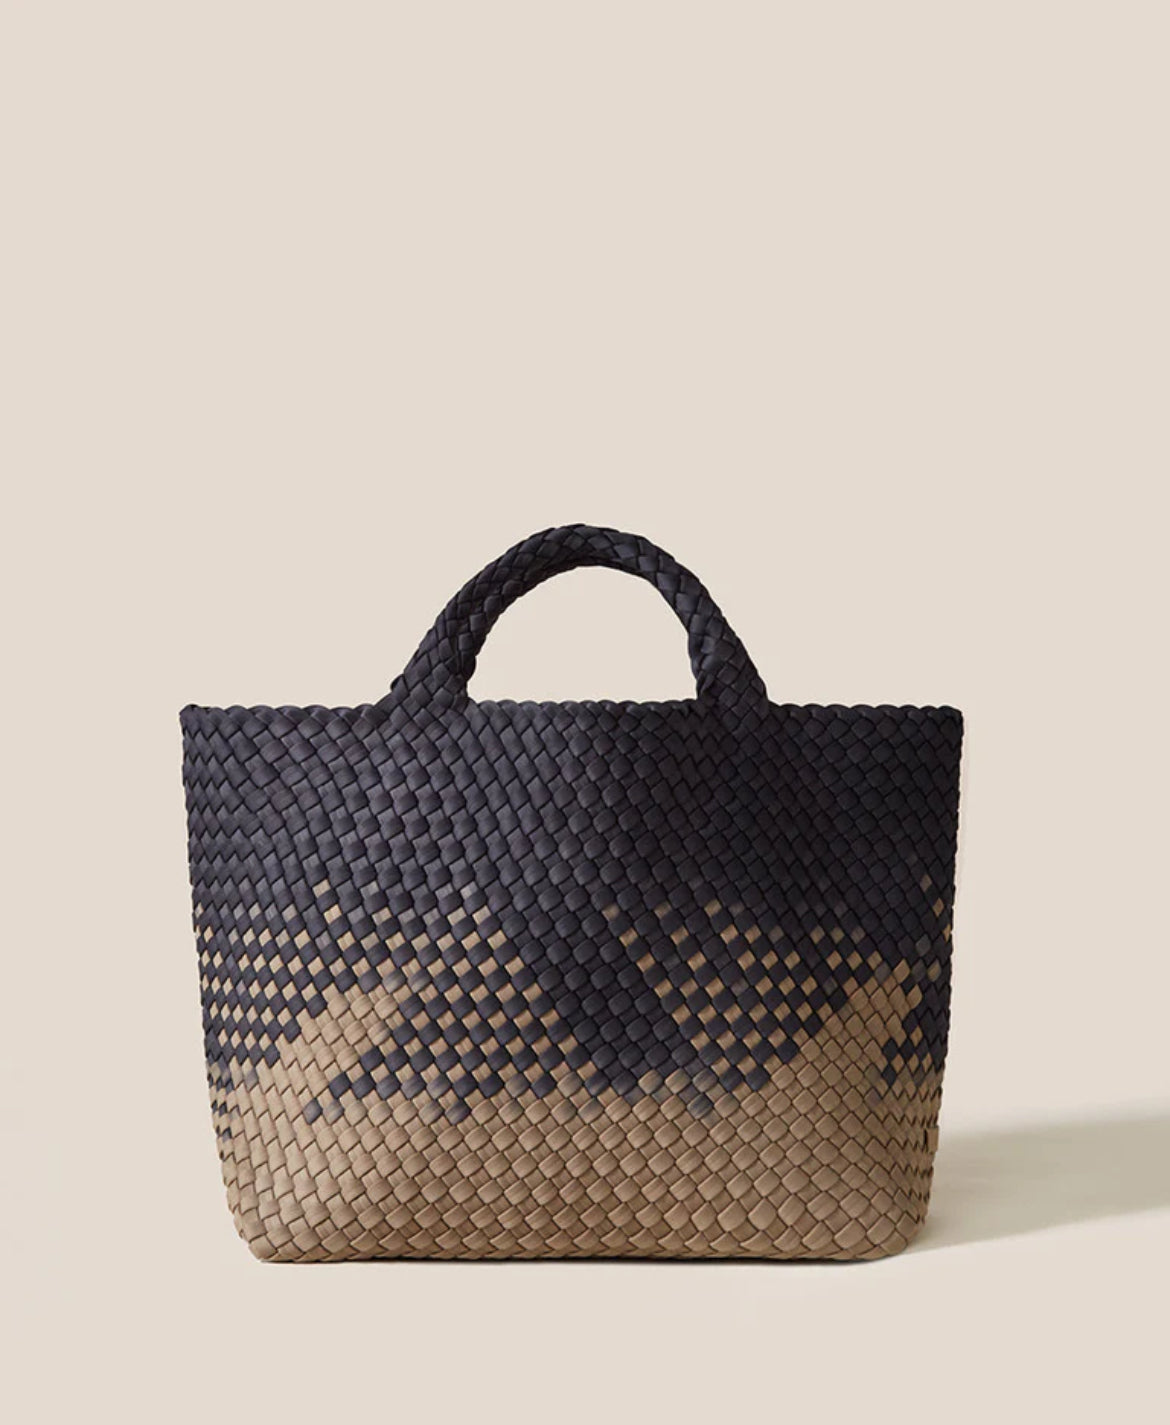 NAGHEDI - St. Barths Medium Graphic Ombre Tote in Mahal